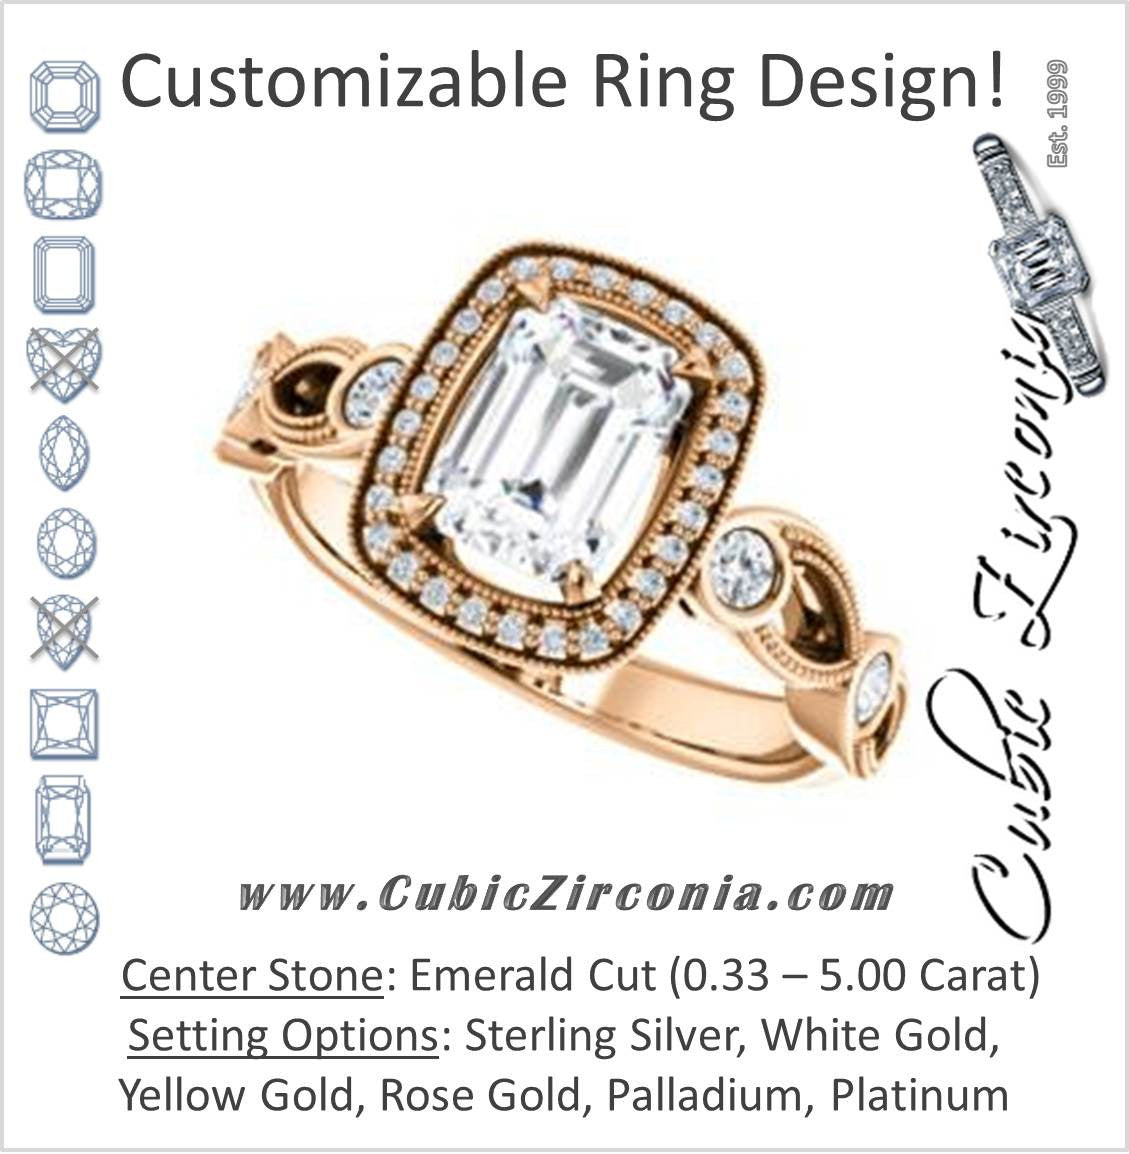 Cubic Zirconia Engagement Ring- The Lois Belle (Customizable Emerald Cut Halo-Style with Twisting Filigreed Infinity Split-Band)